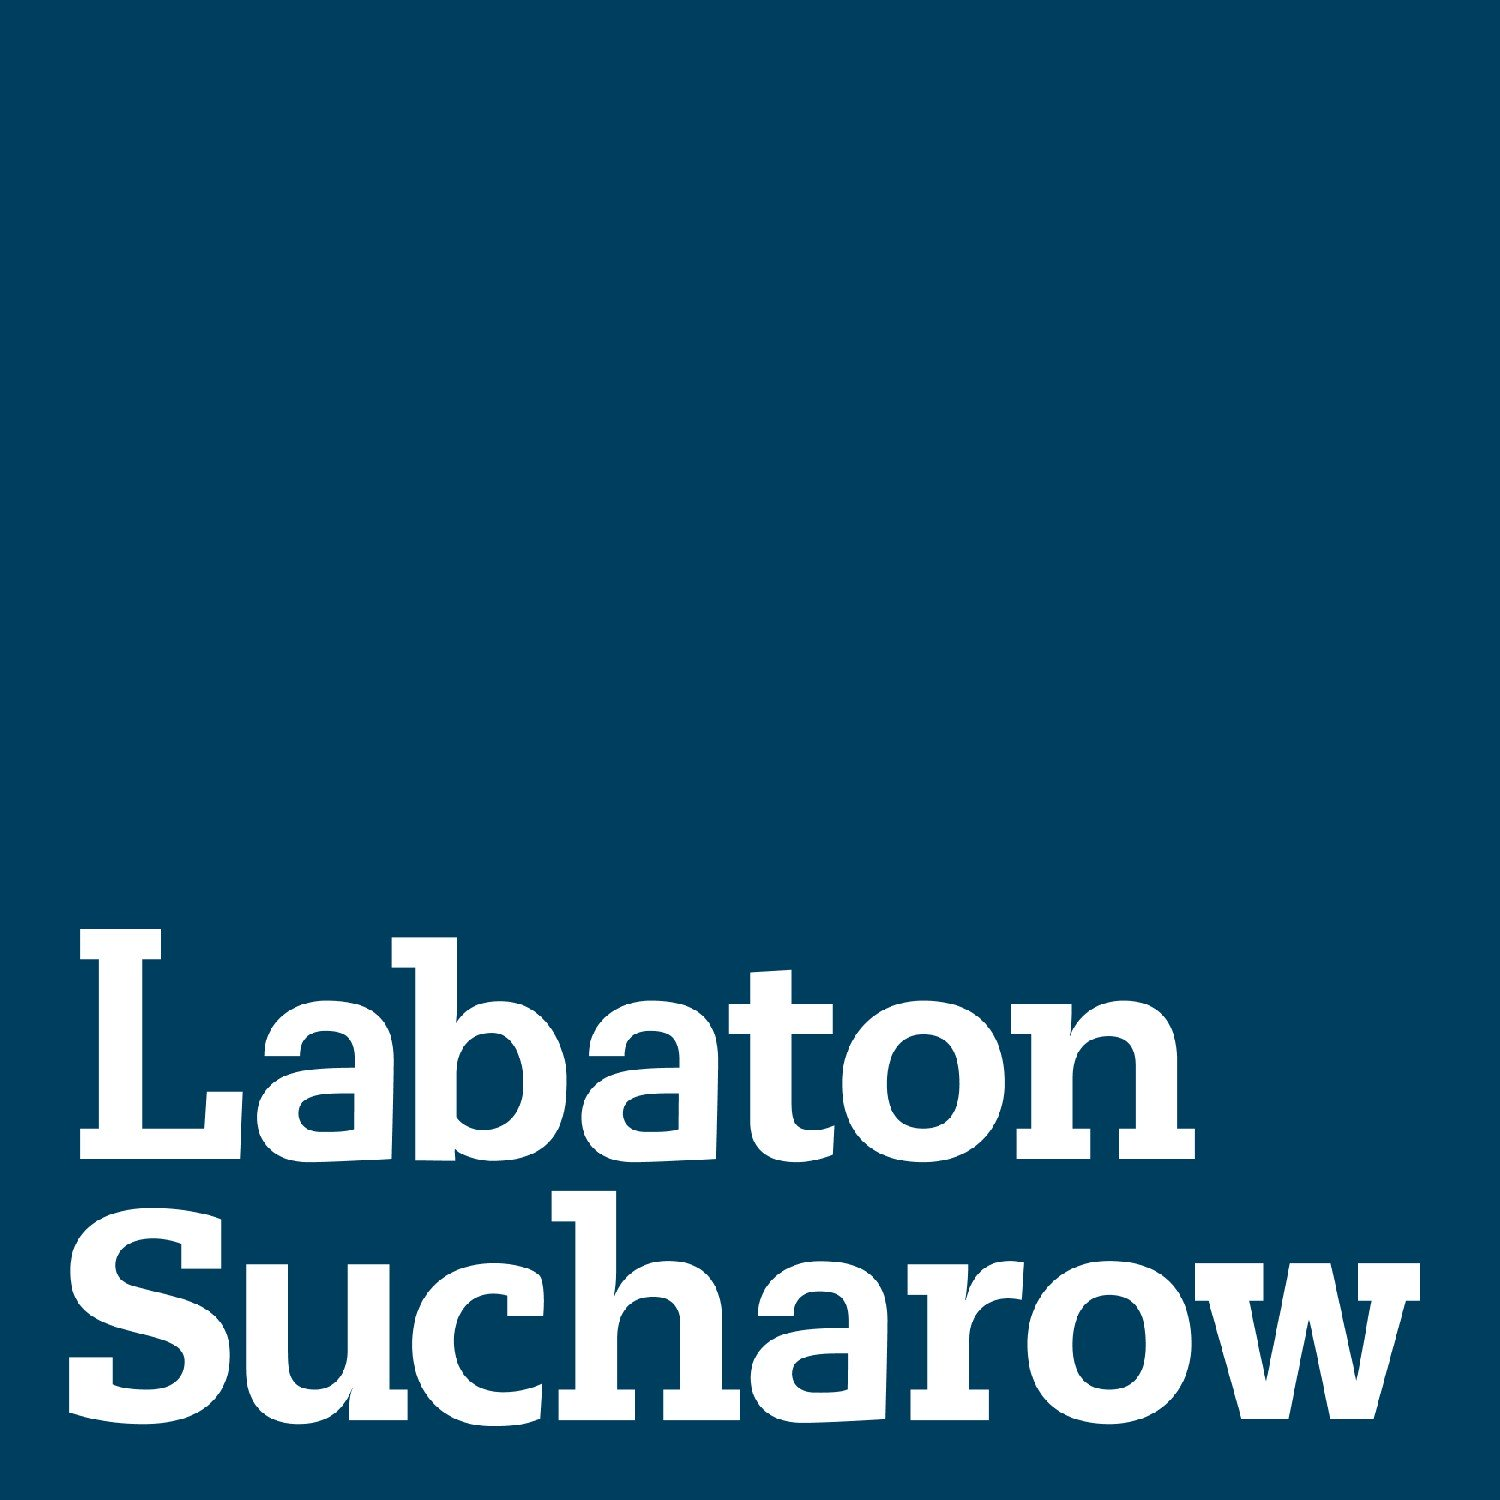 Labaton Sucharow LLP, Thursday, September 10, 2020, Press release picture